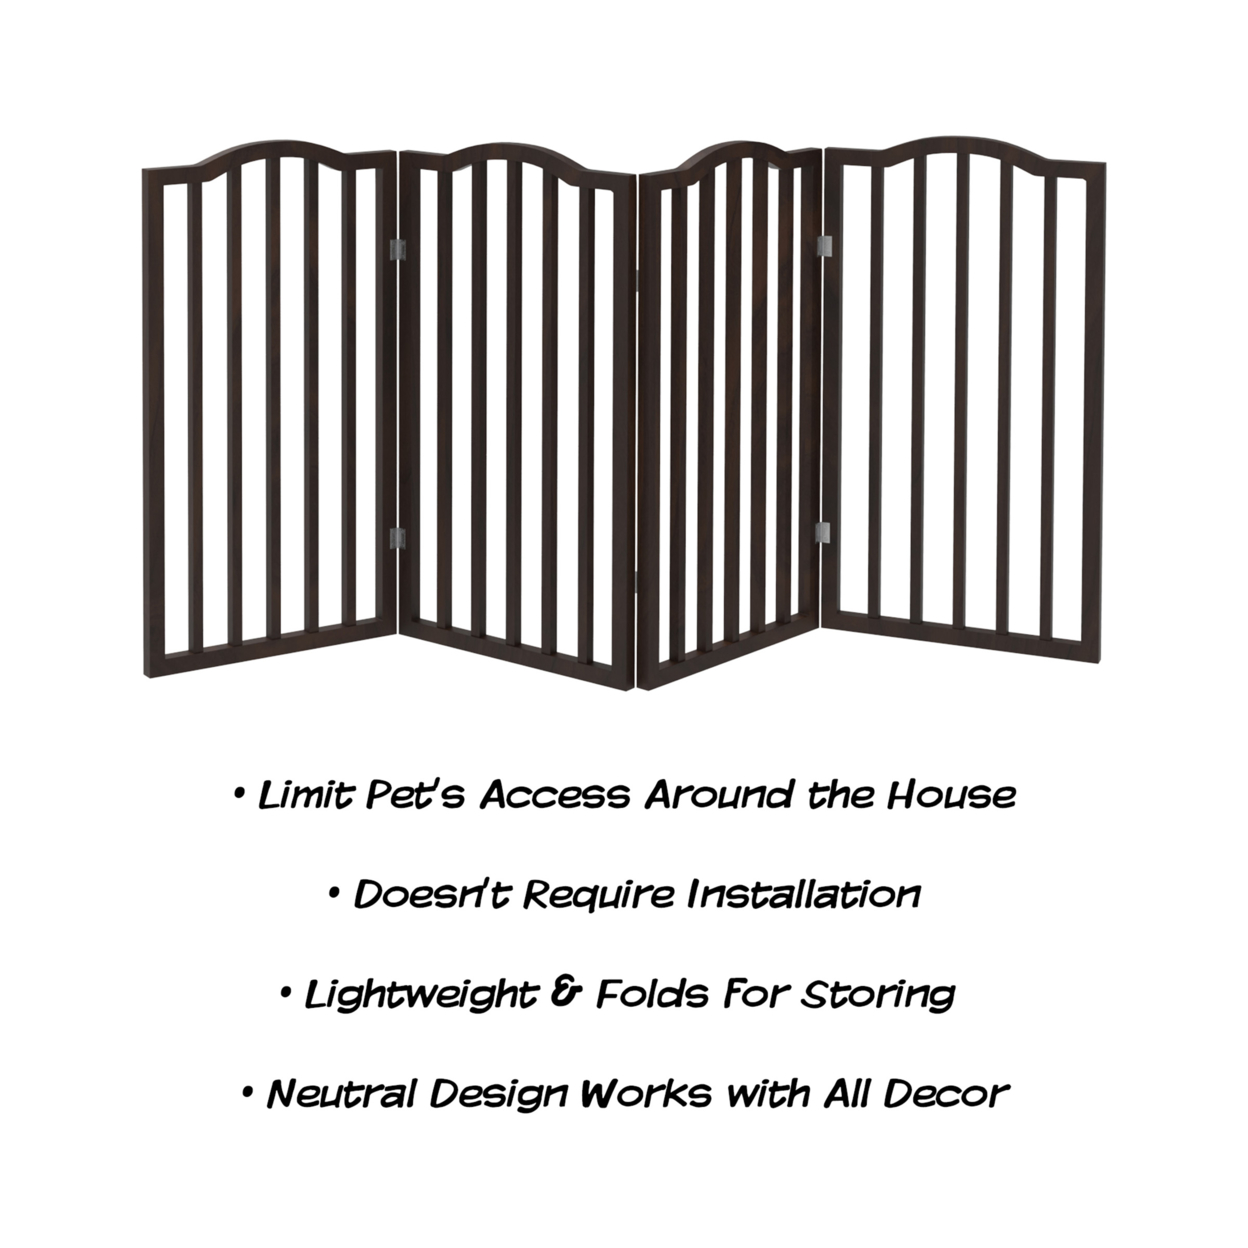 Wooden Pet Gate- Tall Freestanding 4-Panel Indoor Barrier Fence, Foldable With Decorative Arches For Dogs, Puppies, Pets- 72 X32 (Brown)